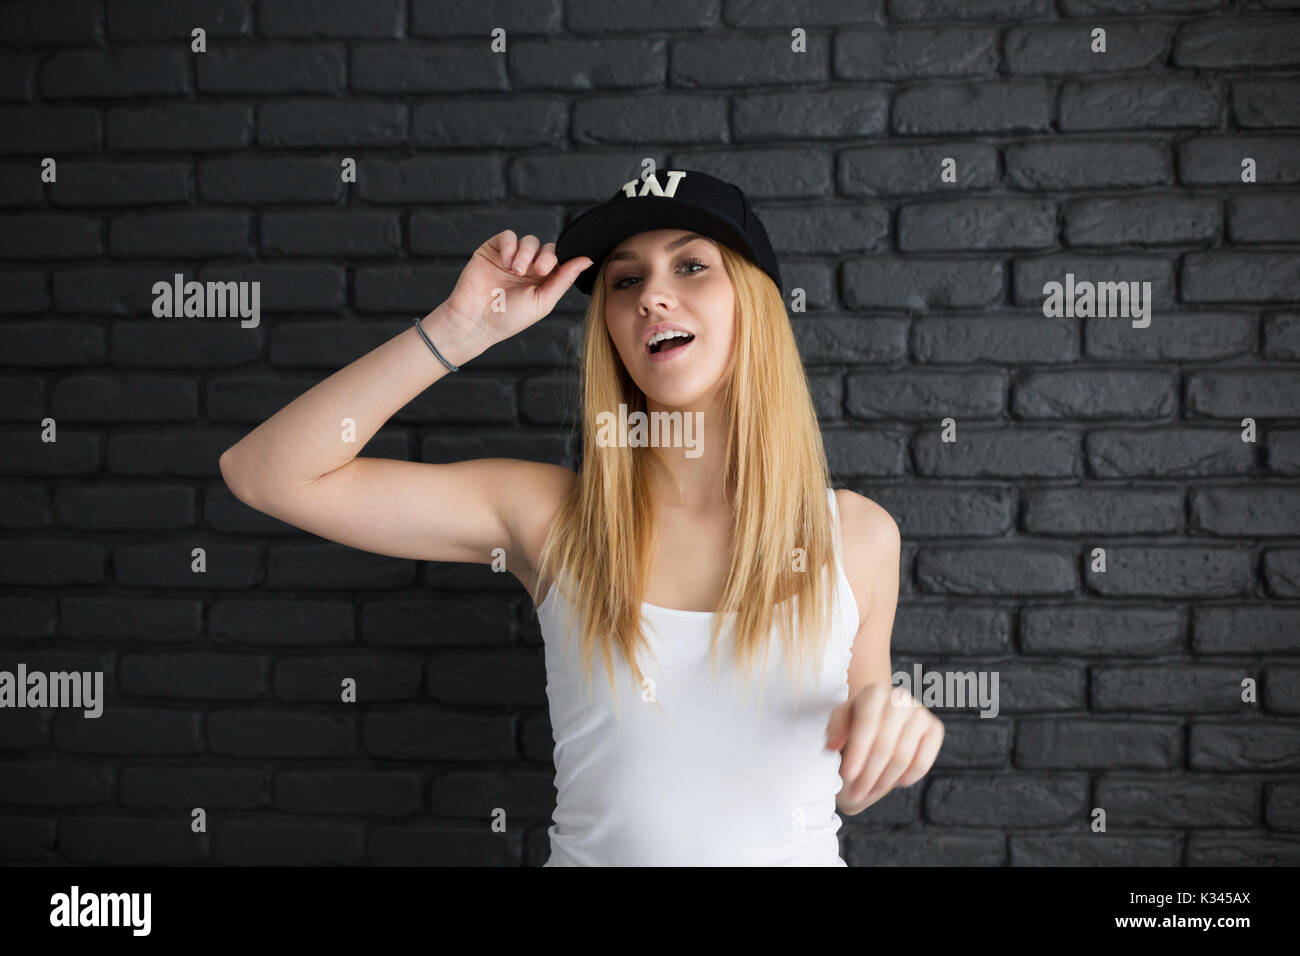 A photo of young, beautiful woman in sports clothes, full of energy and happiness. Stock Photo